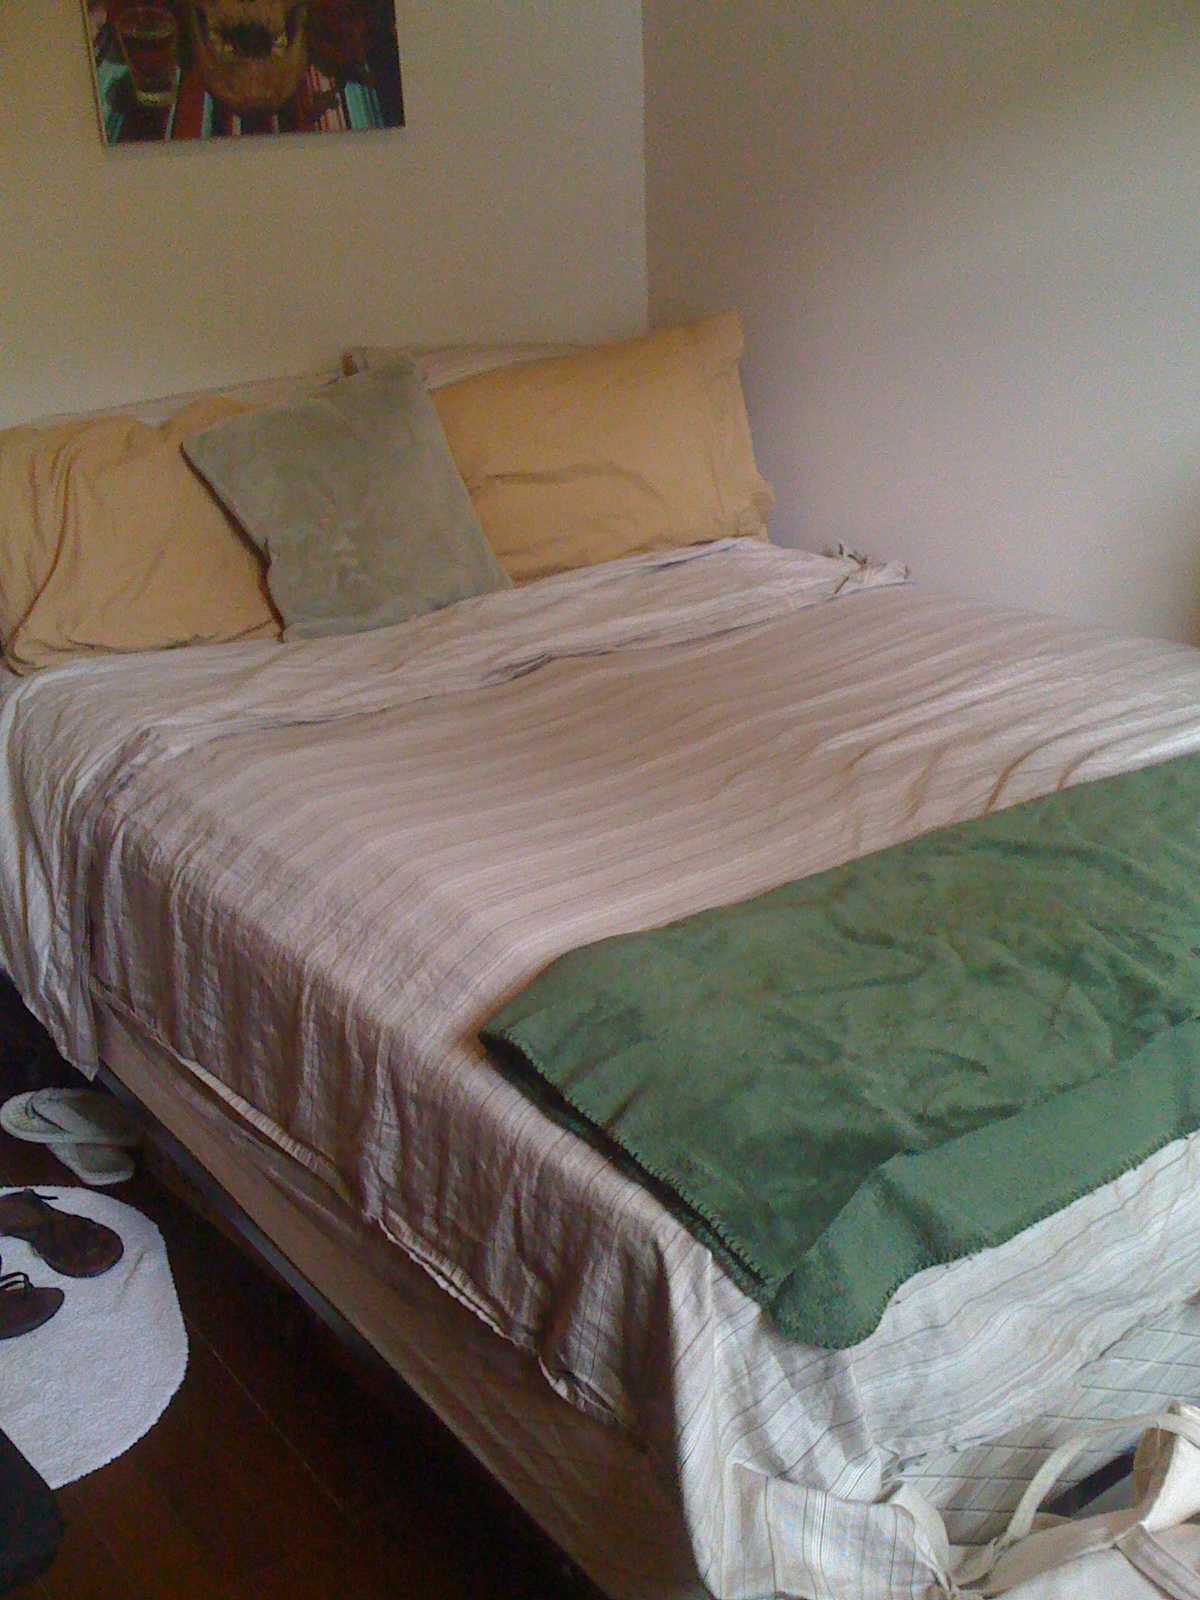 Ditmas Park Listings: Full size mattress, box spring & bed frame - $100